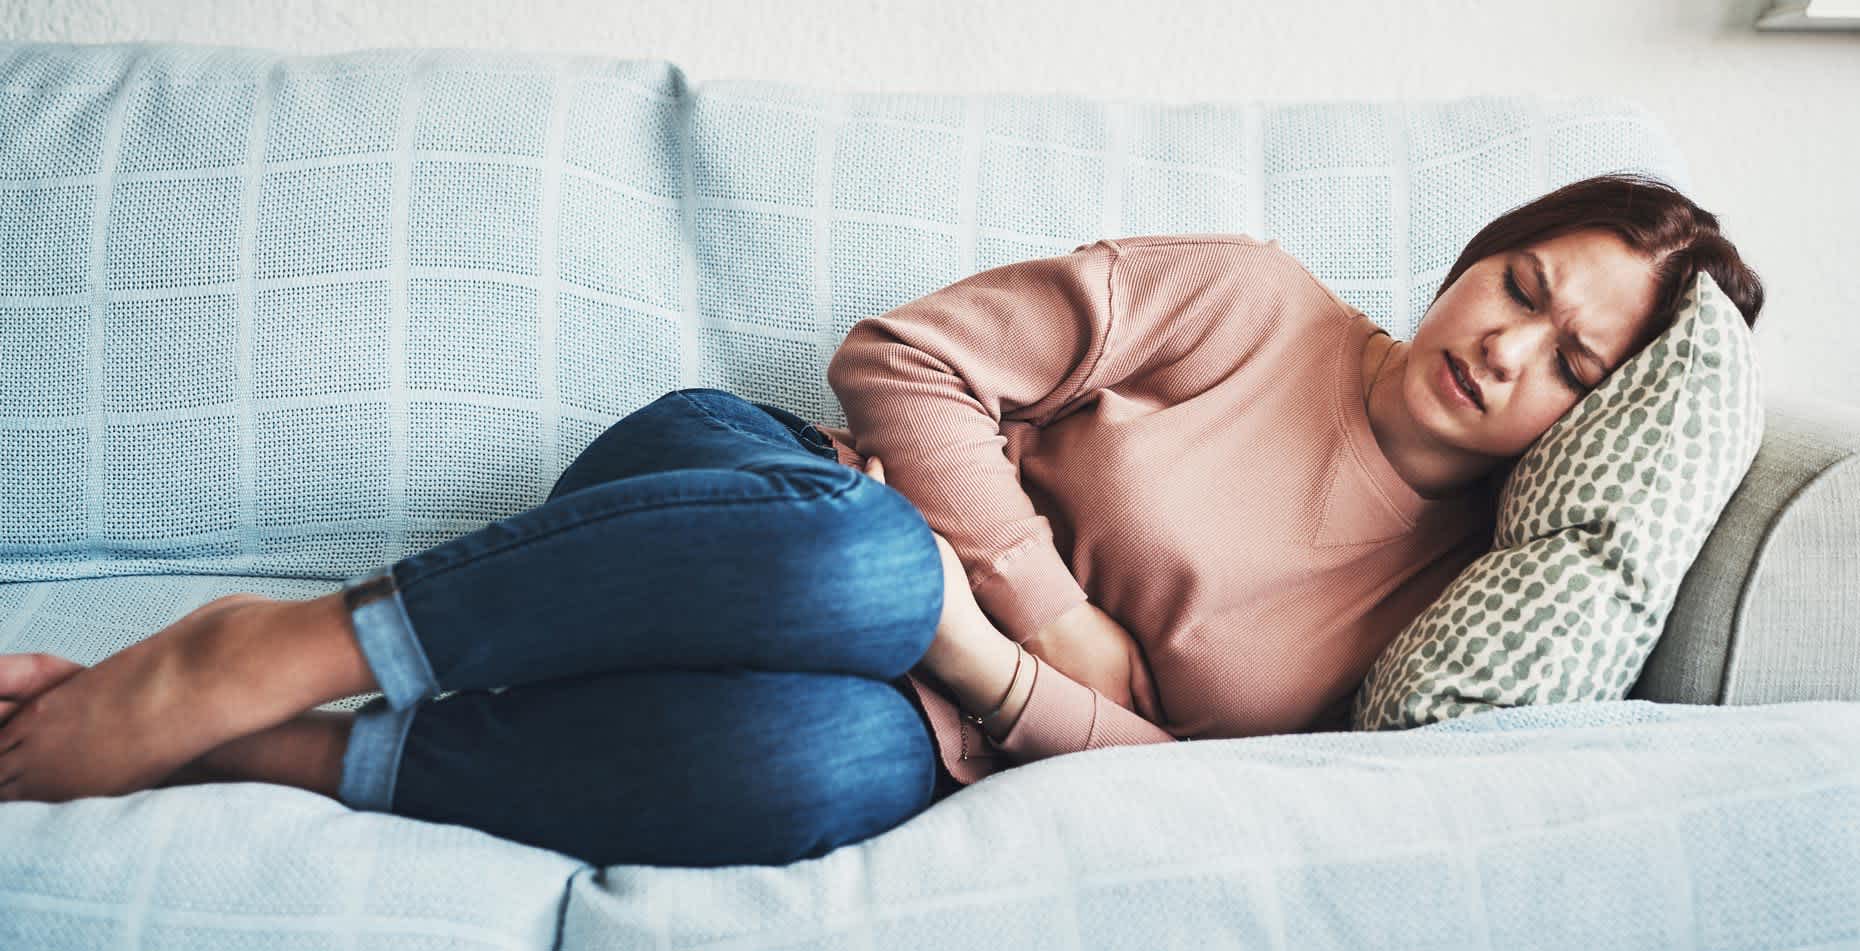 Woman lying on couch experiencing UTI symptoms and wondering how to get rid of a UTI naturally